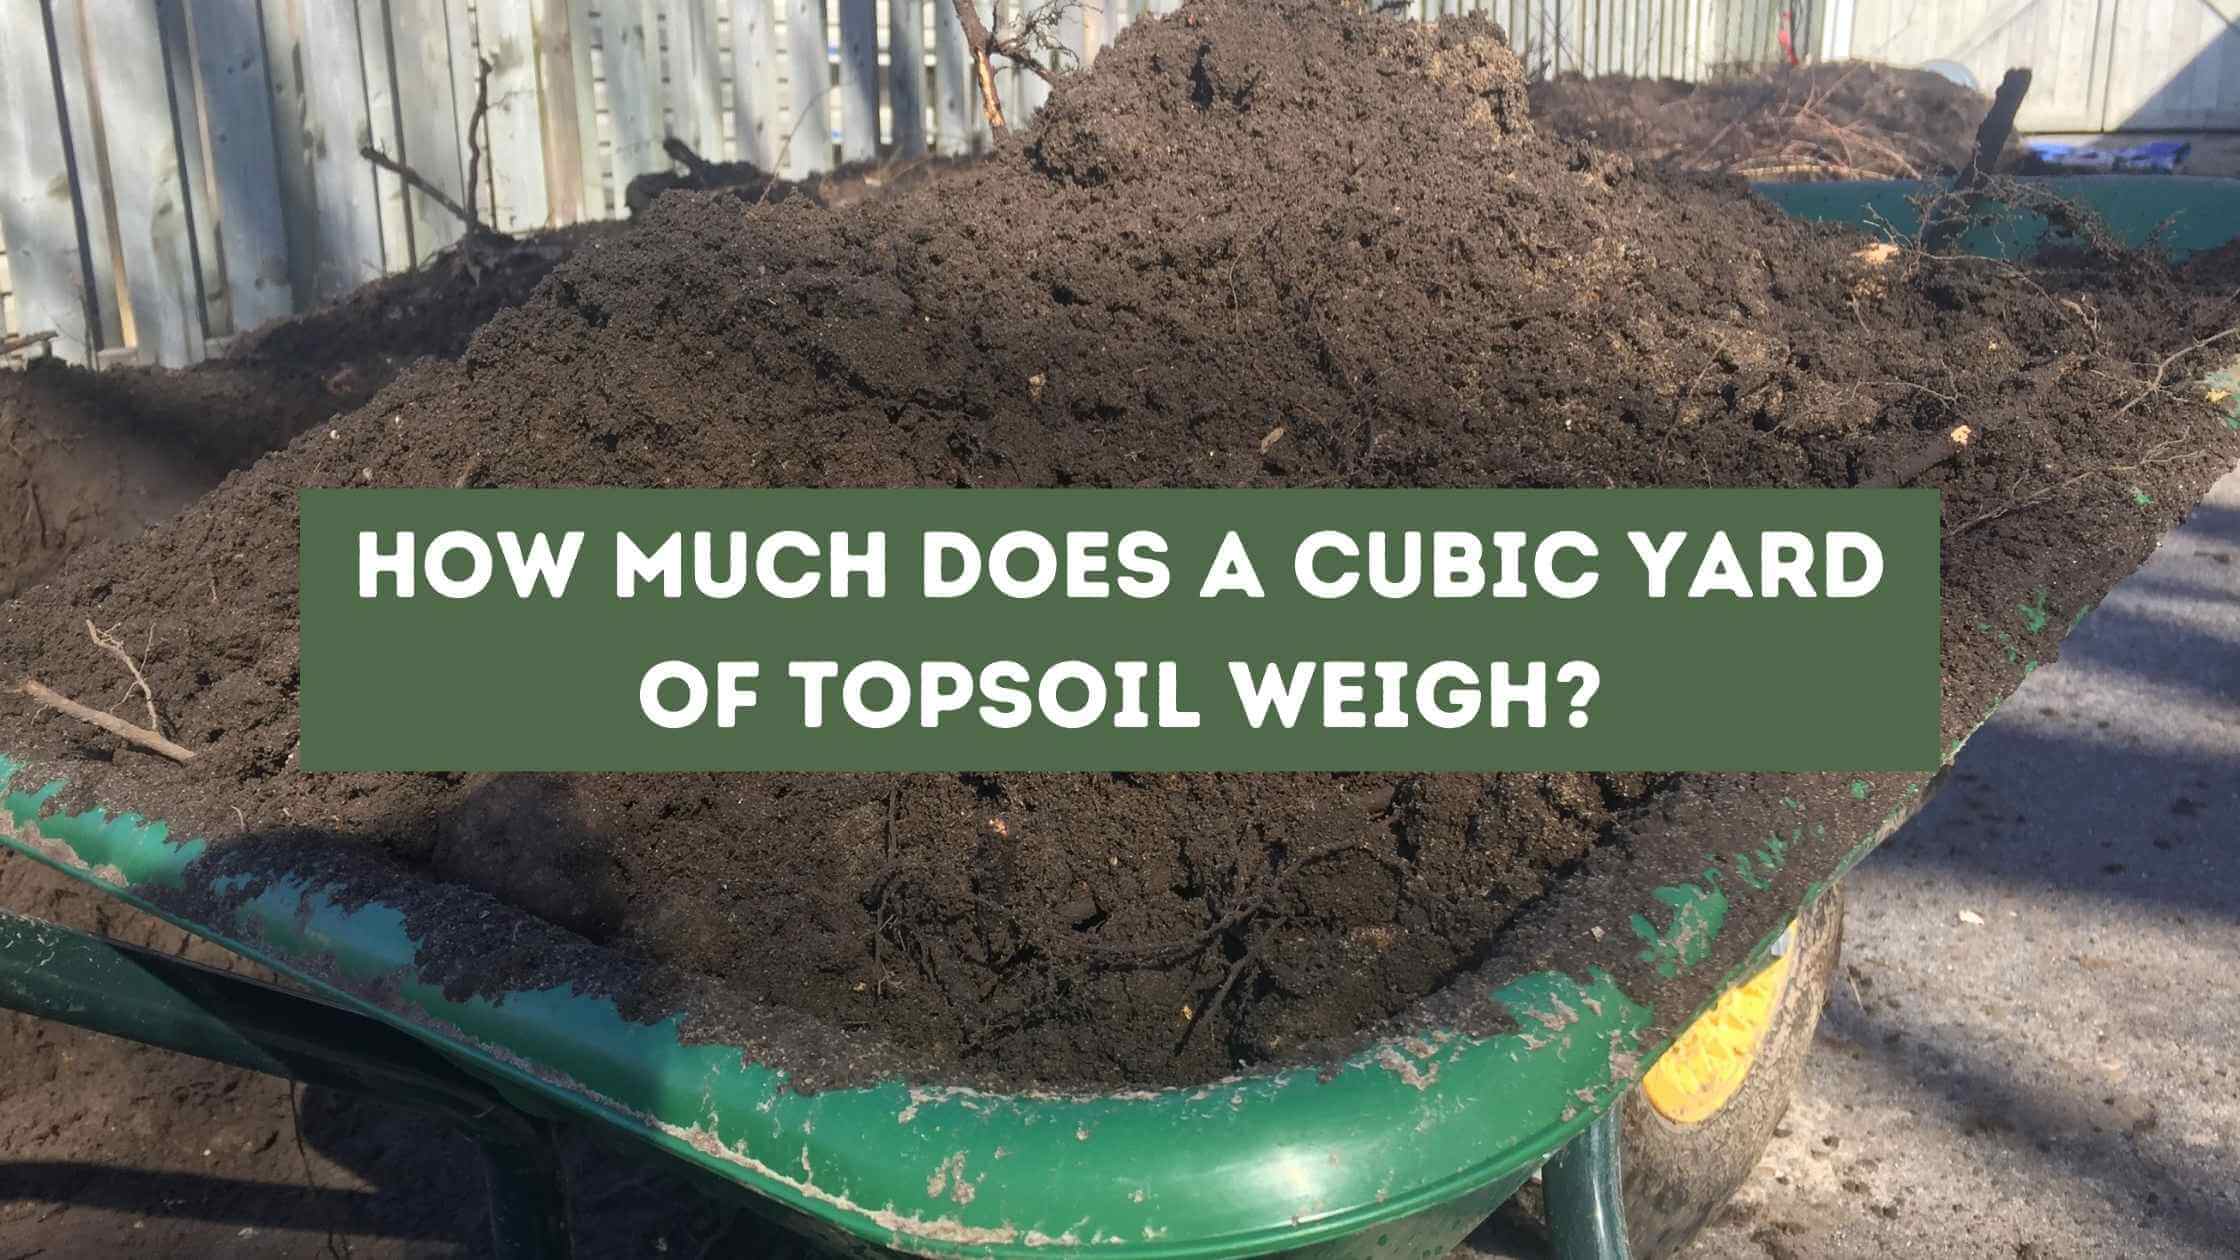 How Much Does a Cubic Yard of Topsoil Weigh